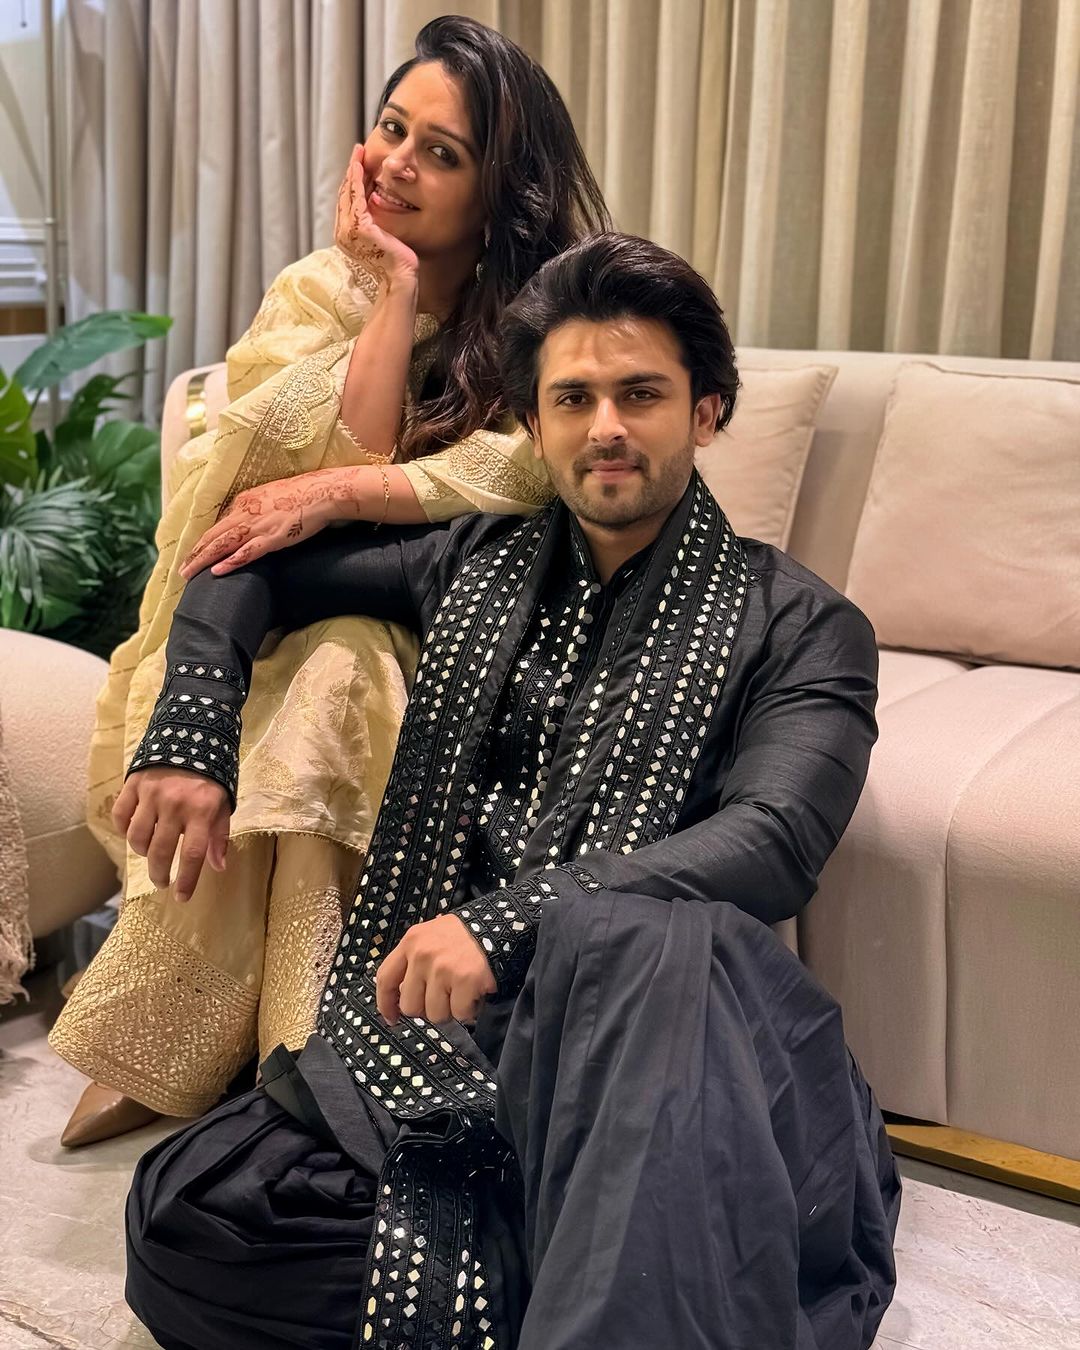 Telly World’s Ideal Couple Shoaib Ibrahim And Dipika Kakar Shares Few Details Of His Mother’s Minor Surgery! Check Out How This Couple Showed Their Support For Her! 